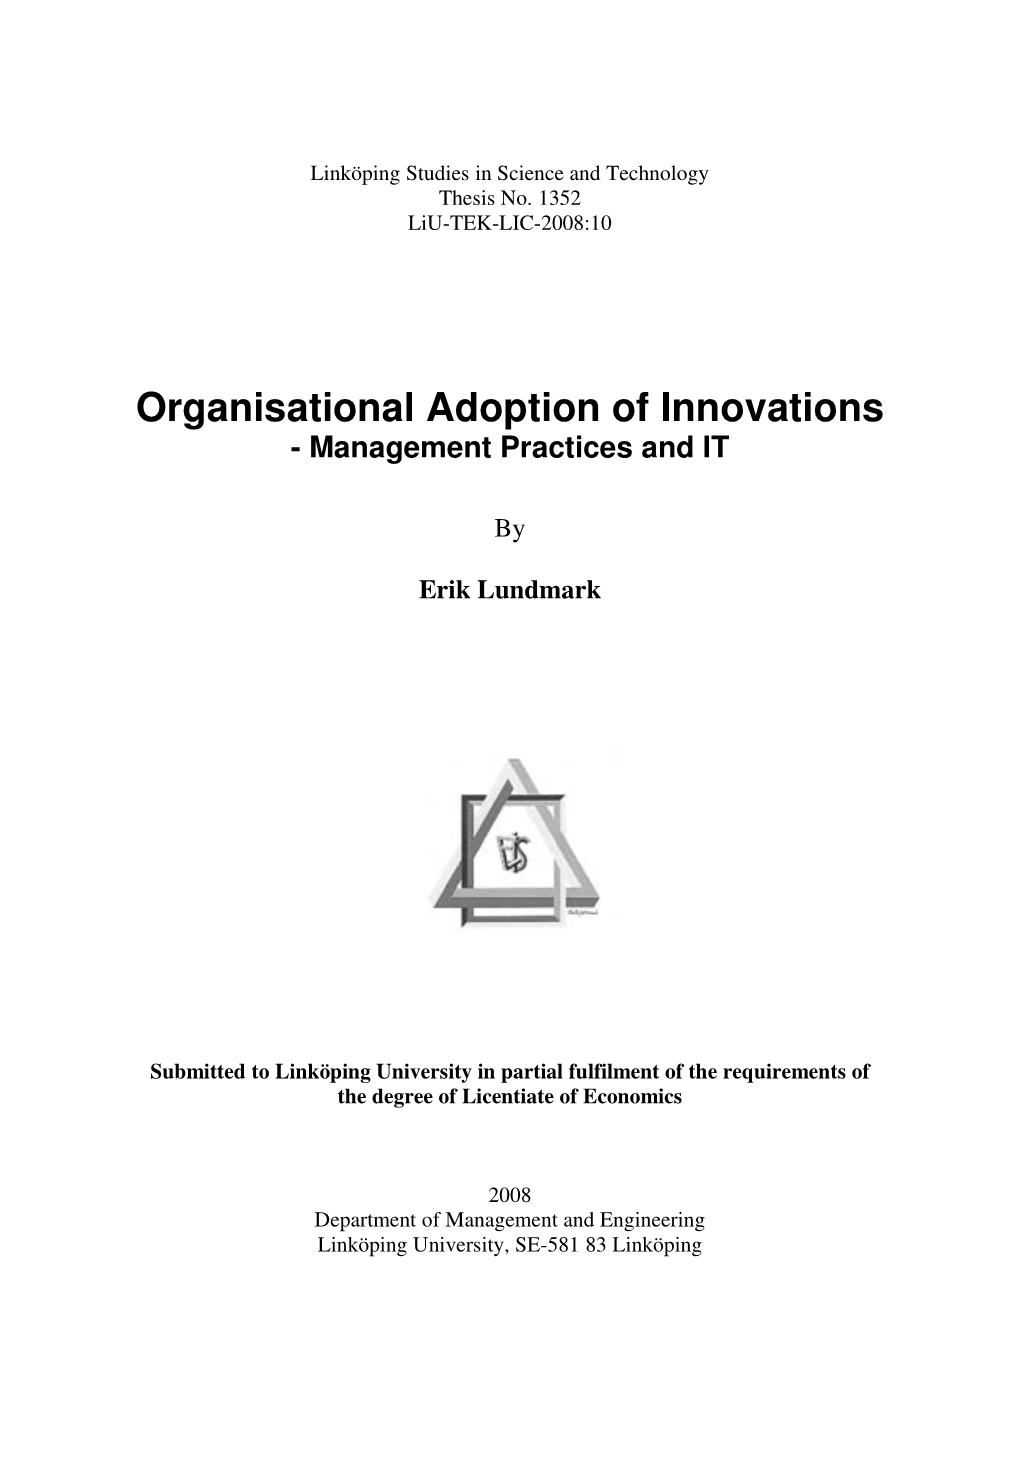 Organisational Adoption of Innovations - Management Practices and IT